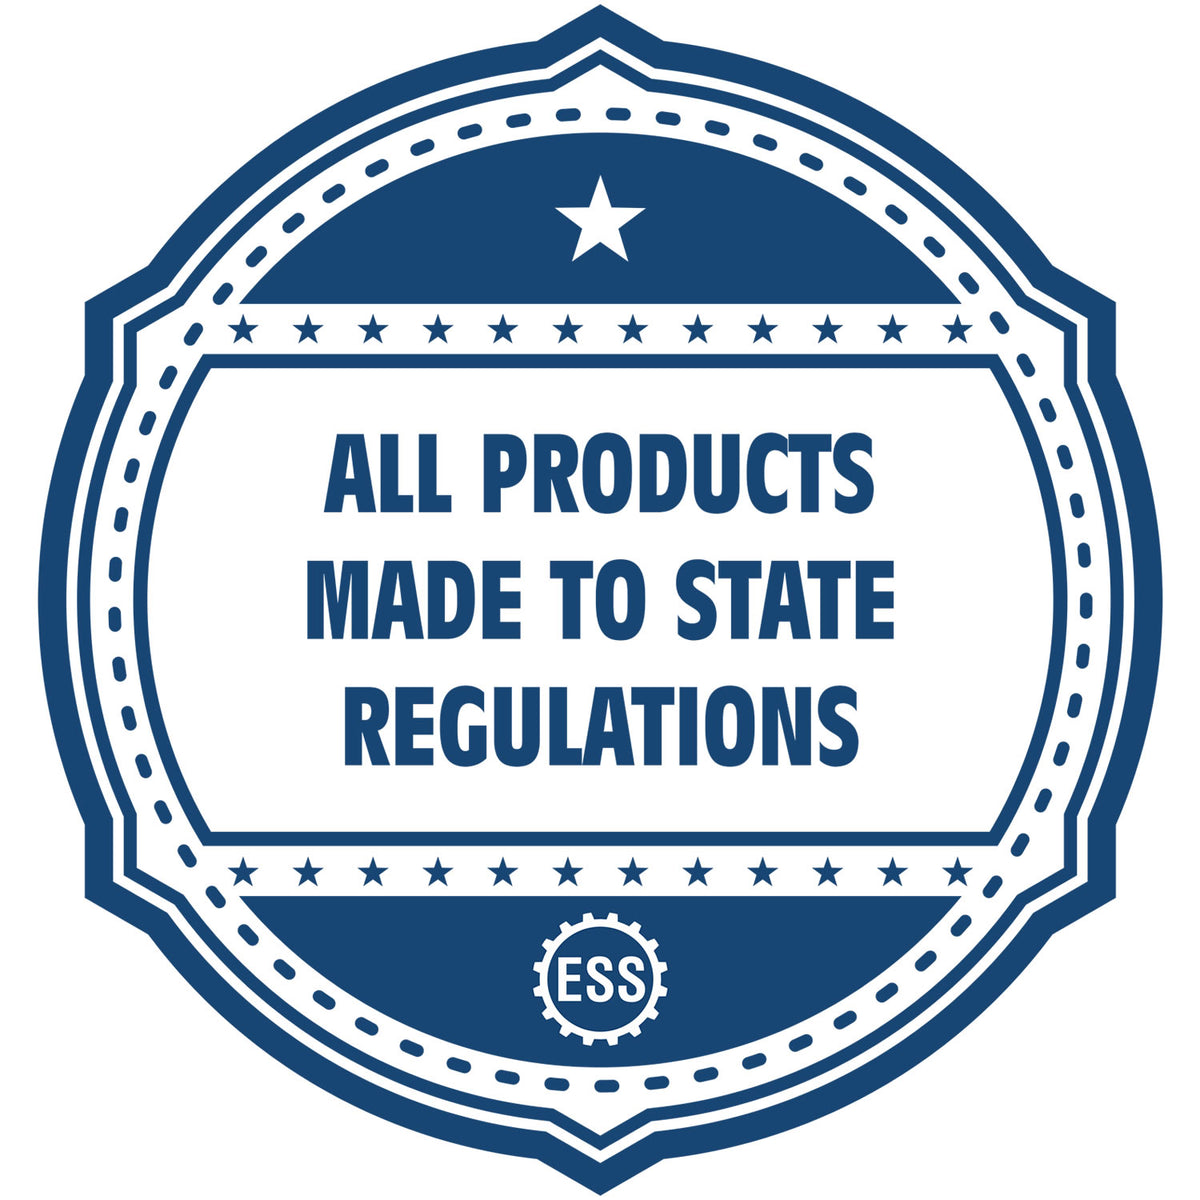 An icon or badge element for the Handheld South Dakota Architect Seal Embosser showing that this product is made in compliance with state regulations.